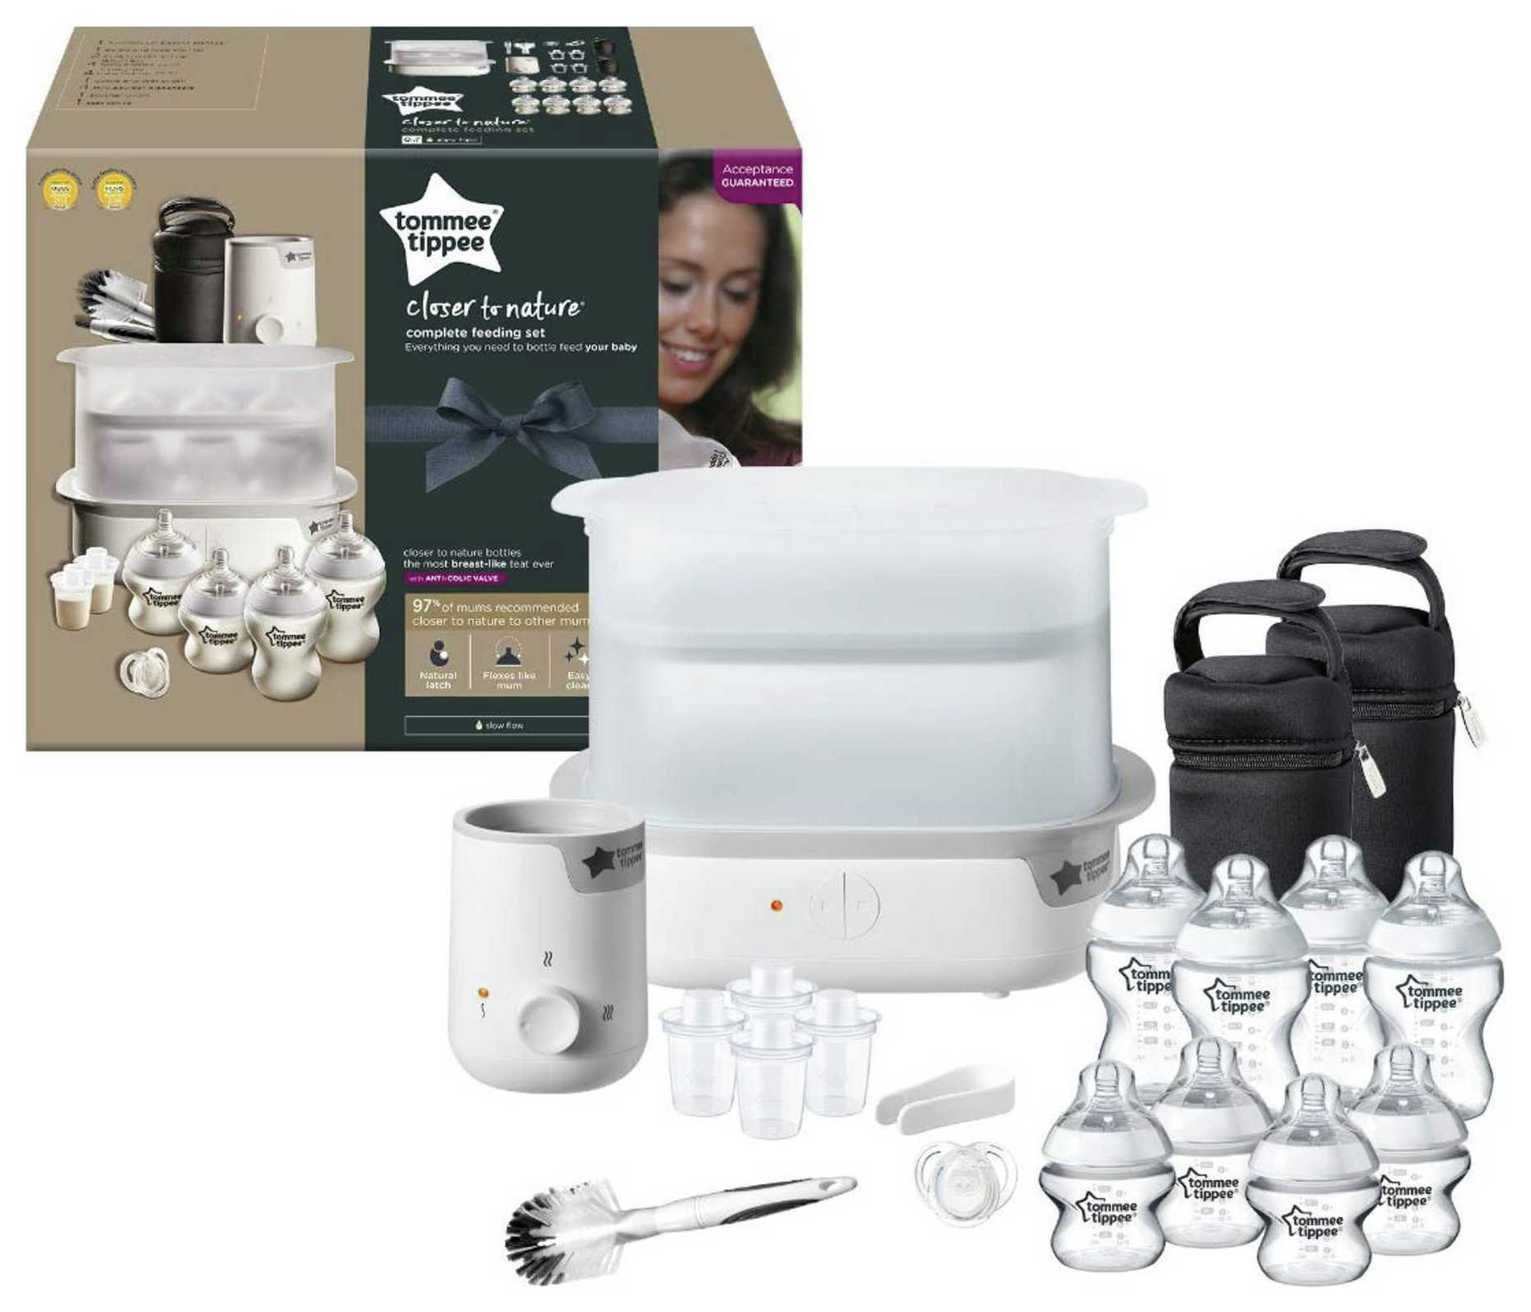 Tommee Tippee Complete Feeding Set Review